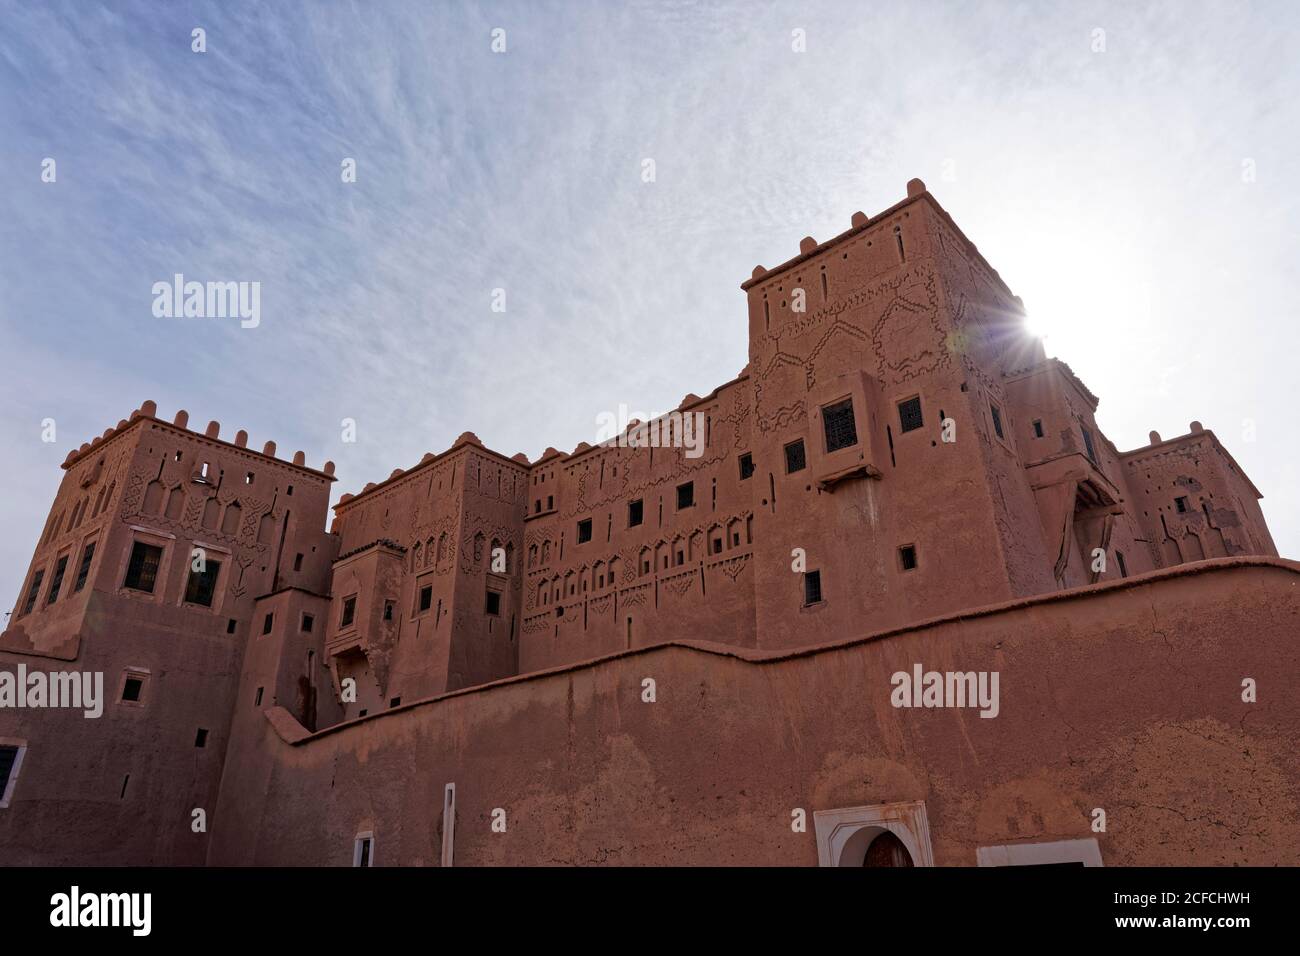 Kasbah Taourirt, Morocco, Ouarzazate, traditional architecture Stock Photo